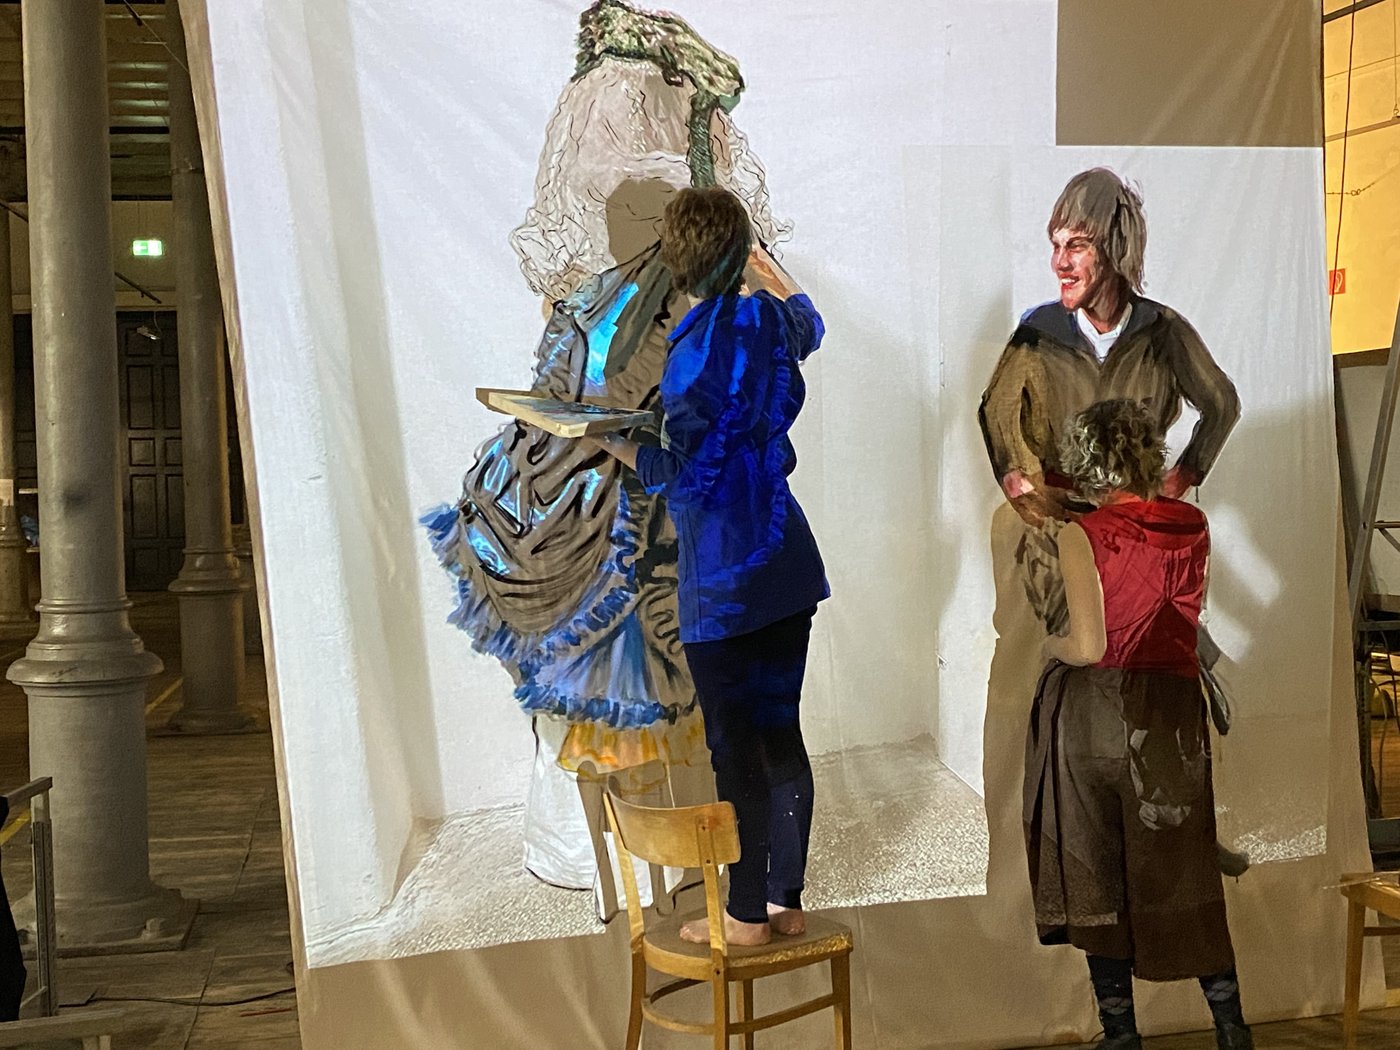 Two students stand in front of a screen onto which costumes are projected and which they paint. One of them stands on a chair.